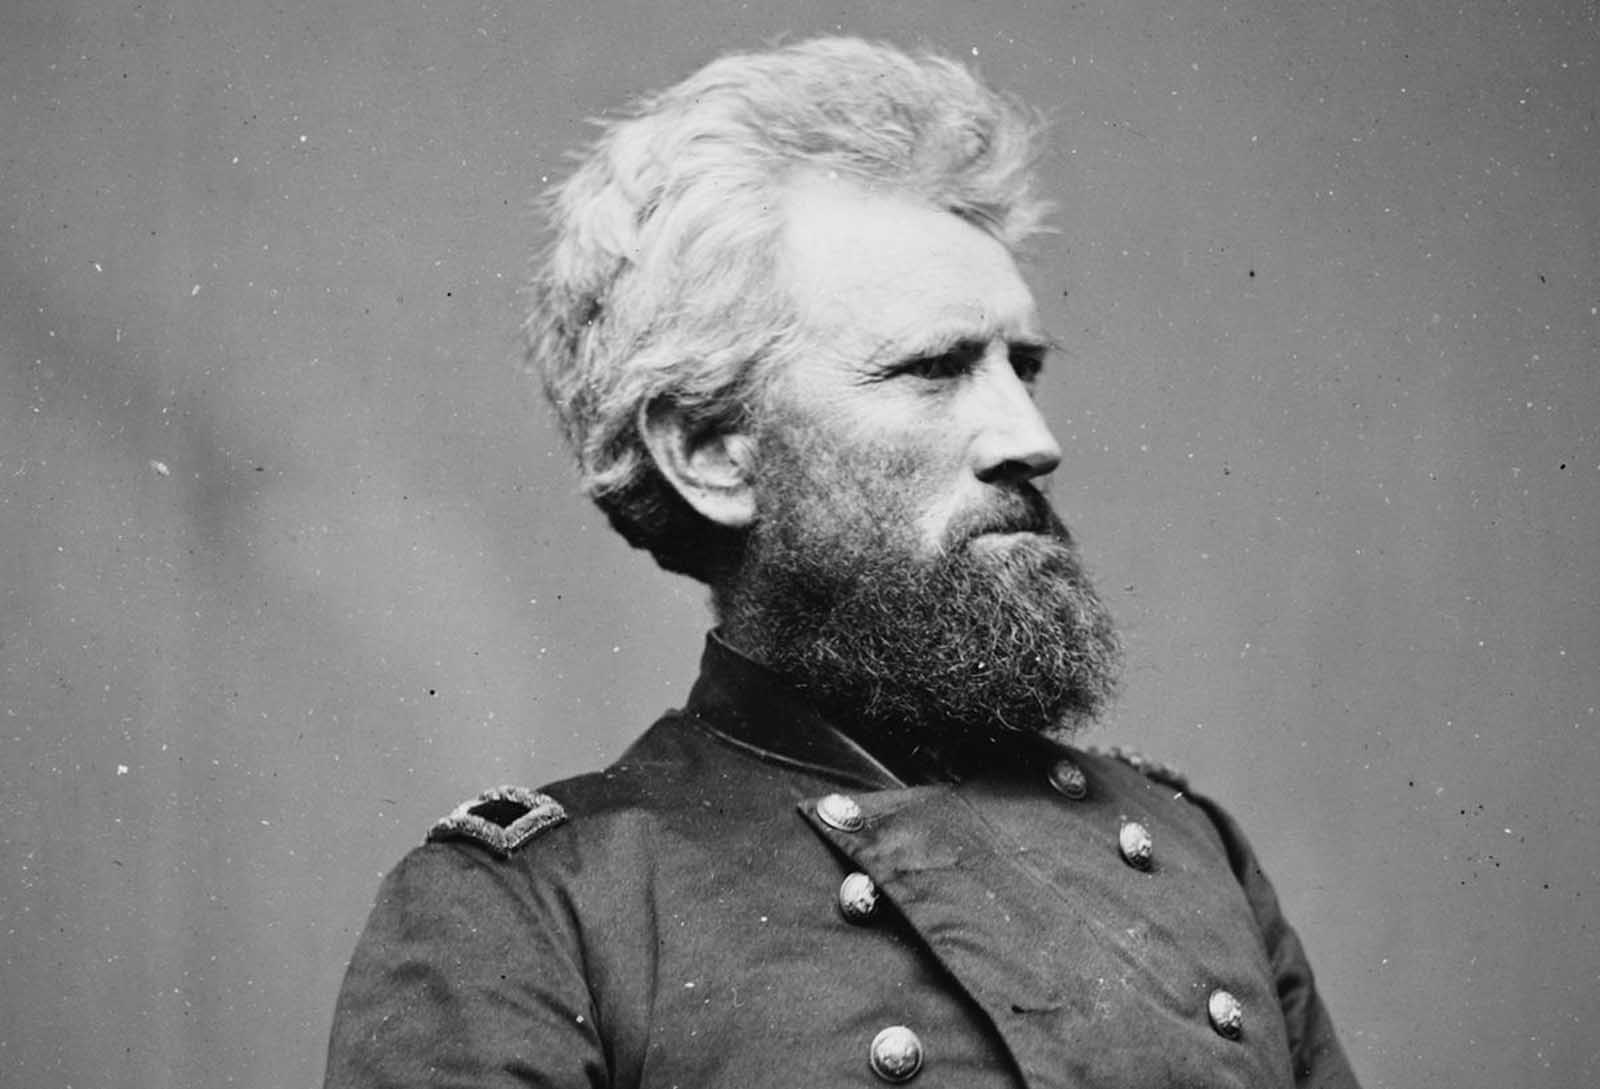 Portrait of Brigadier General Robert Huston Milroy, officer of the Union Army. Milroy most noted for his defeat at the Second Battle of Winchester in 1863. He later became Superintendent of Indian Affairs in the Washington Territory. Milroy died in Olympia, Washington in 1890, at the age of 73.